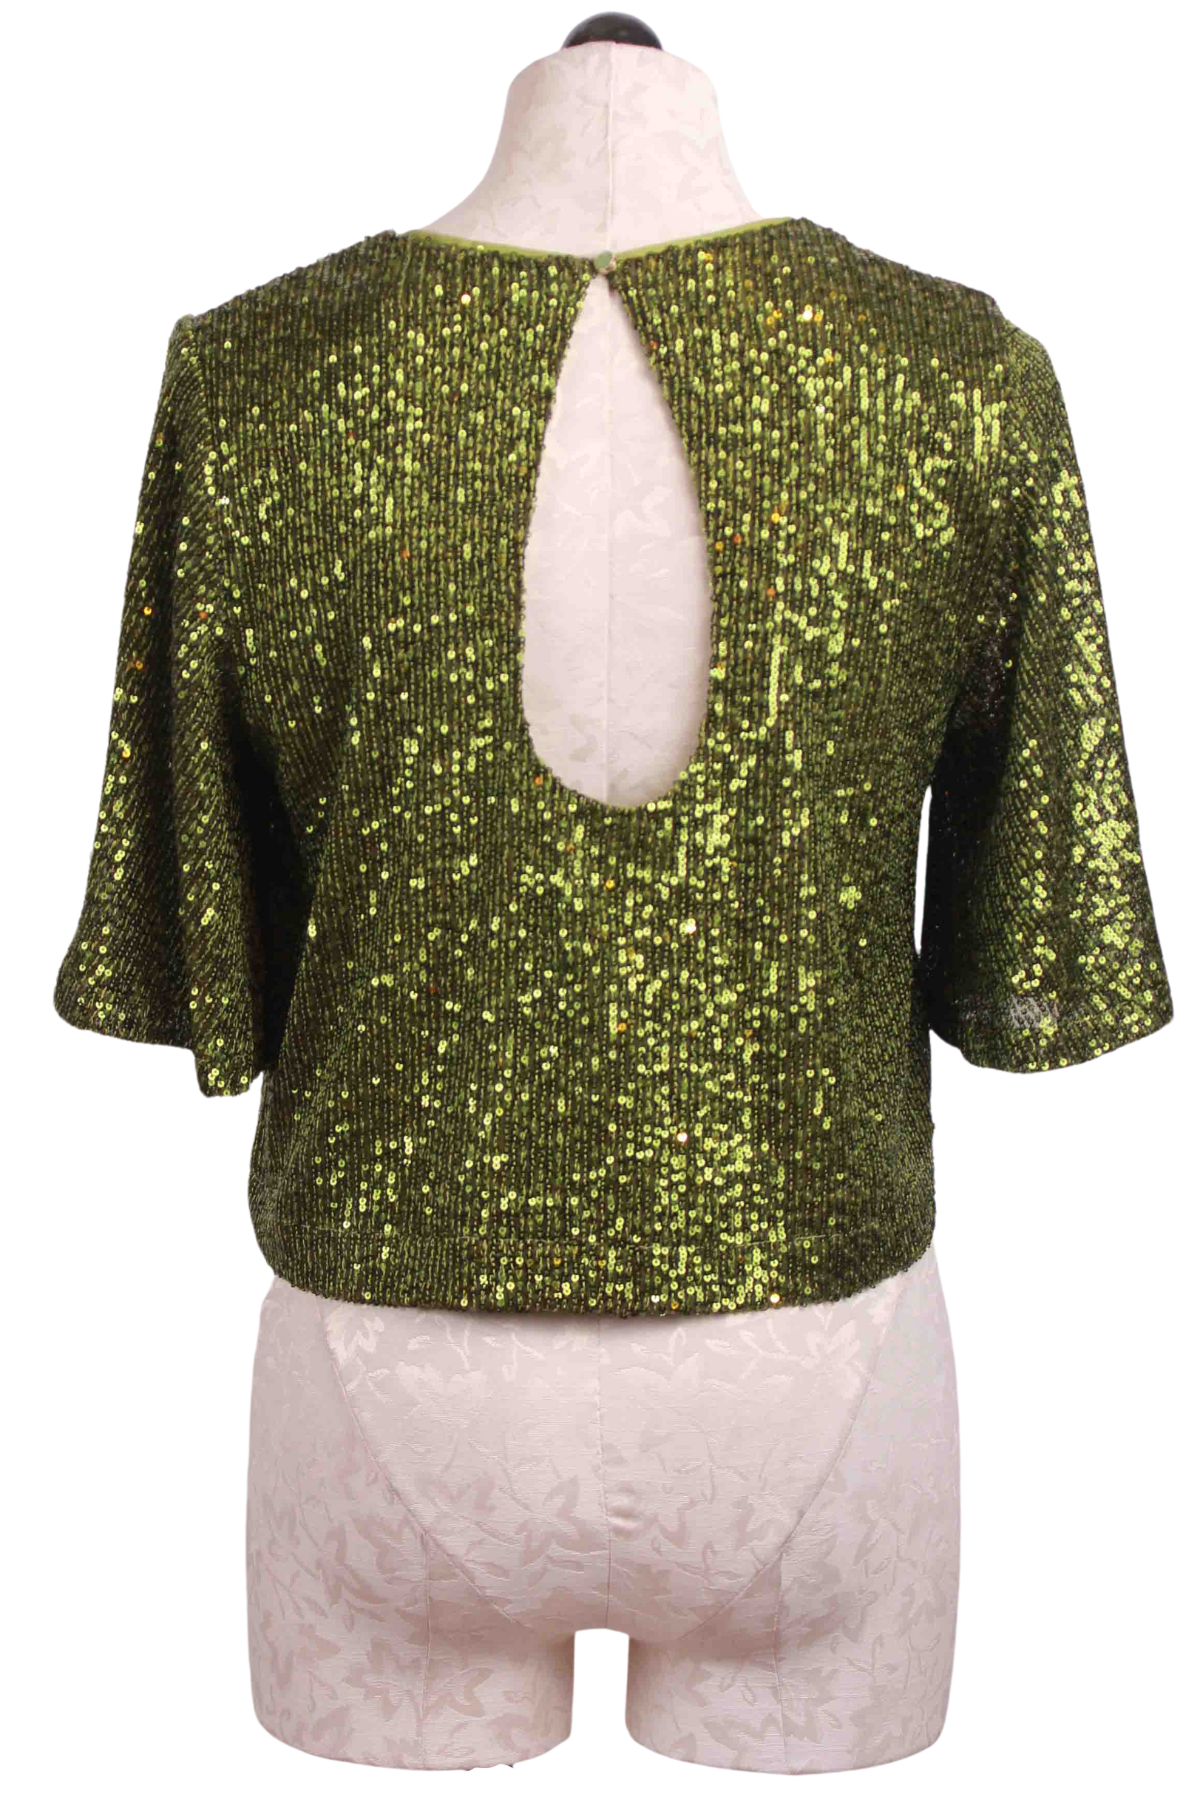 Back view of Green Sparkle Sequined Cropped Flutter Sleeve Top by Traffic People